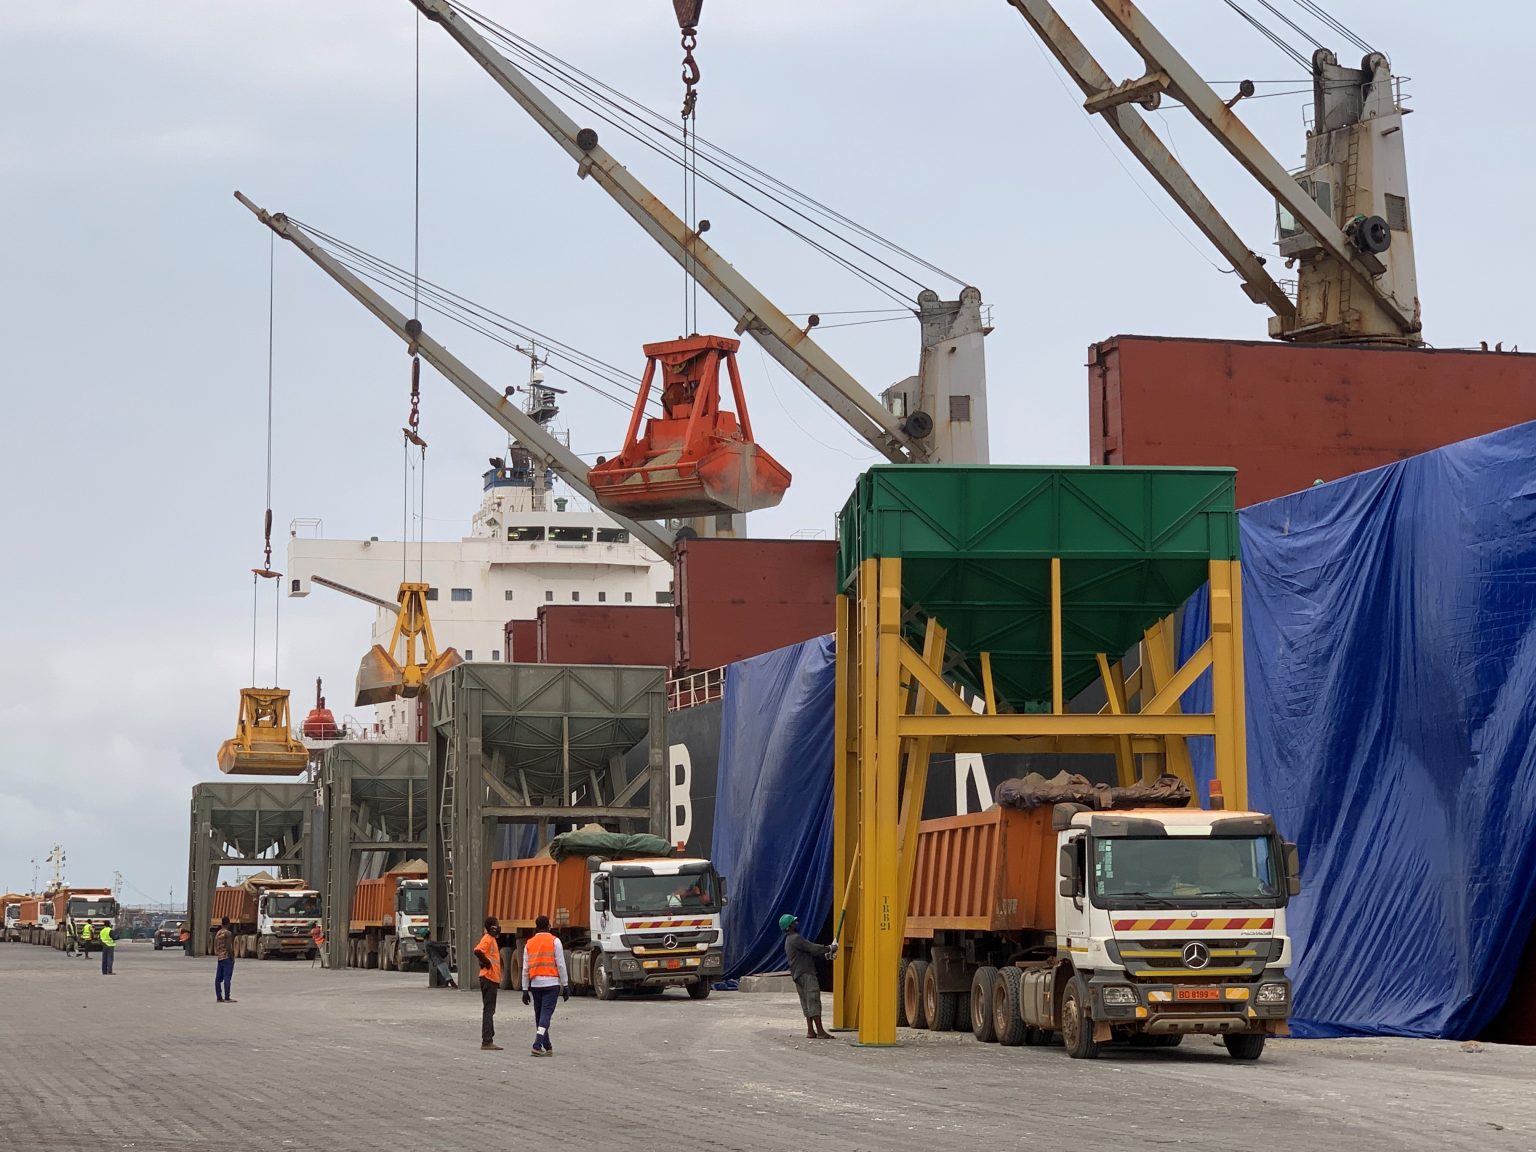 Benin: Dissolution of Société Béninoise de Manutention Portuaire (SOBEMAP) gives way to the creation of a new handling company at the port of Cotonou